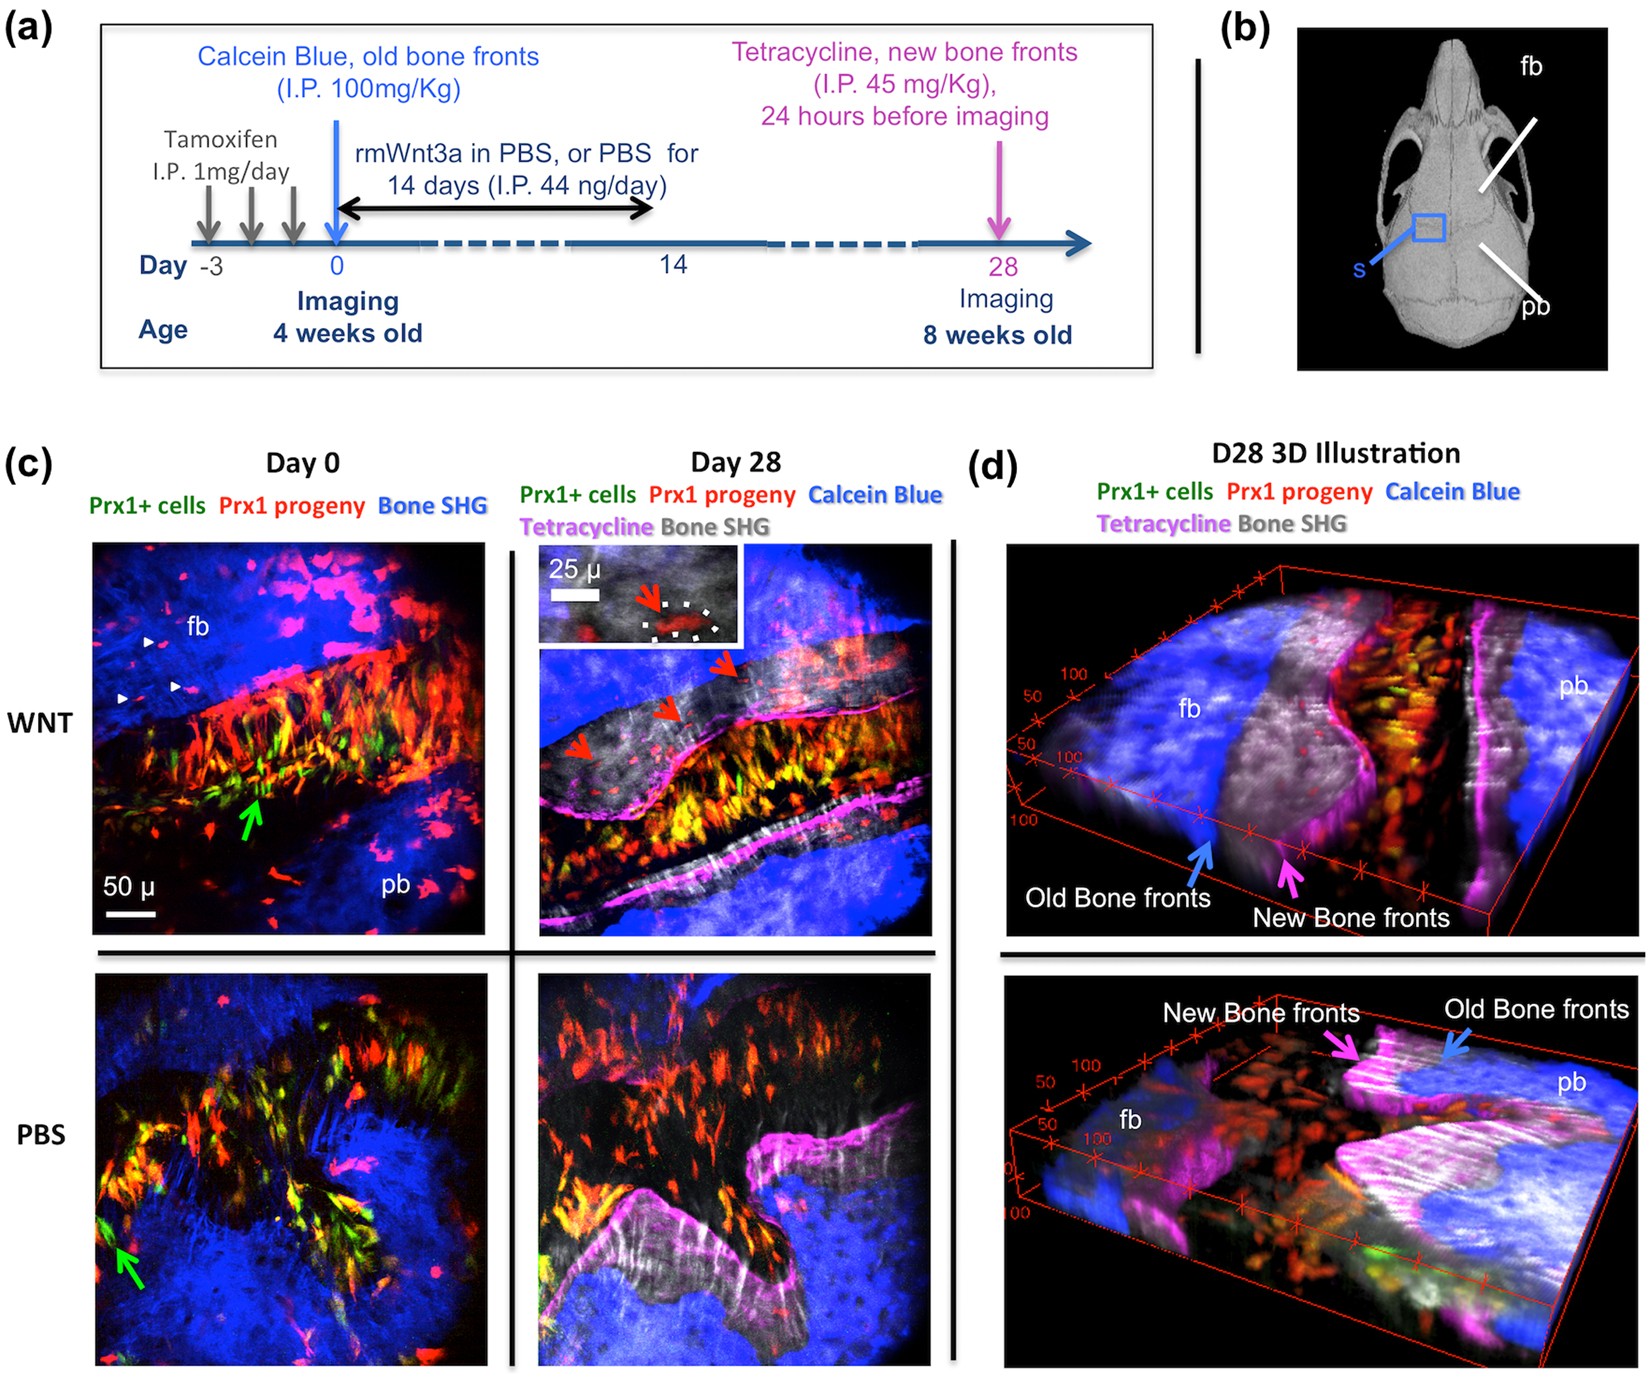 In Vivo High-Resolution Bioimaging of Bone Marrow and Fracture